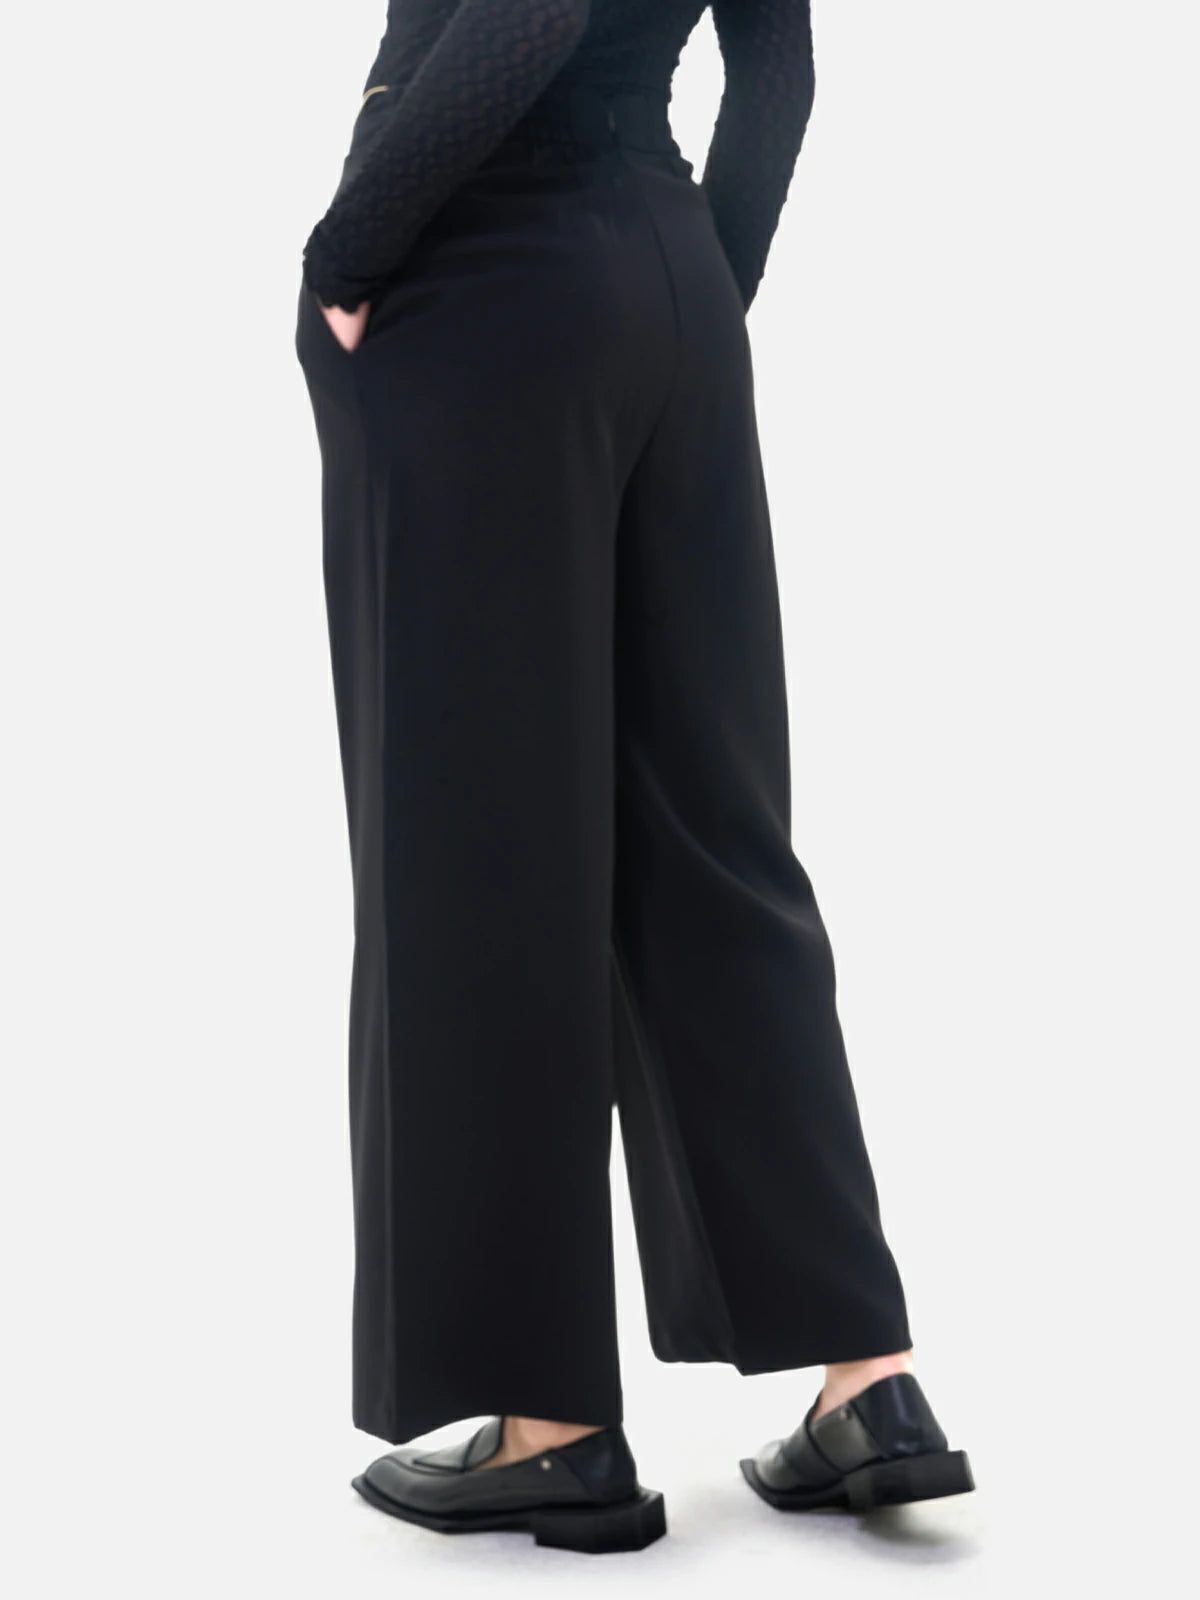 Uniquely designed black wide-leg pants with a waistband flip and color-blocking detail, adding a vibrant touch to the overall look